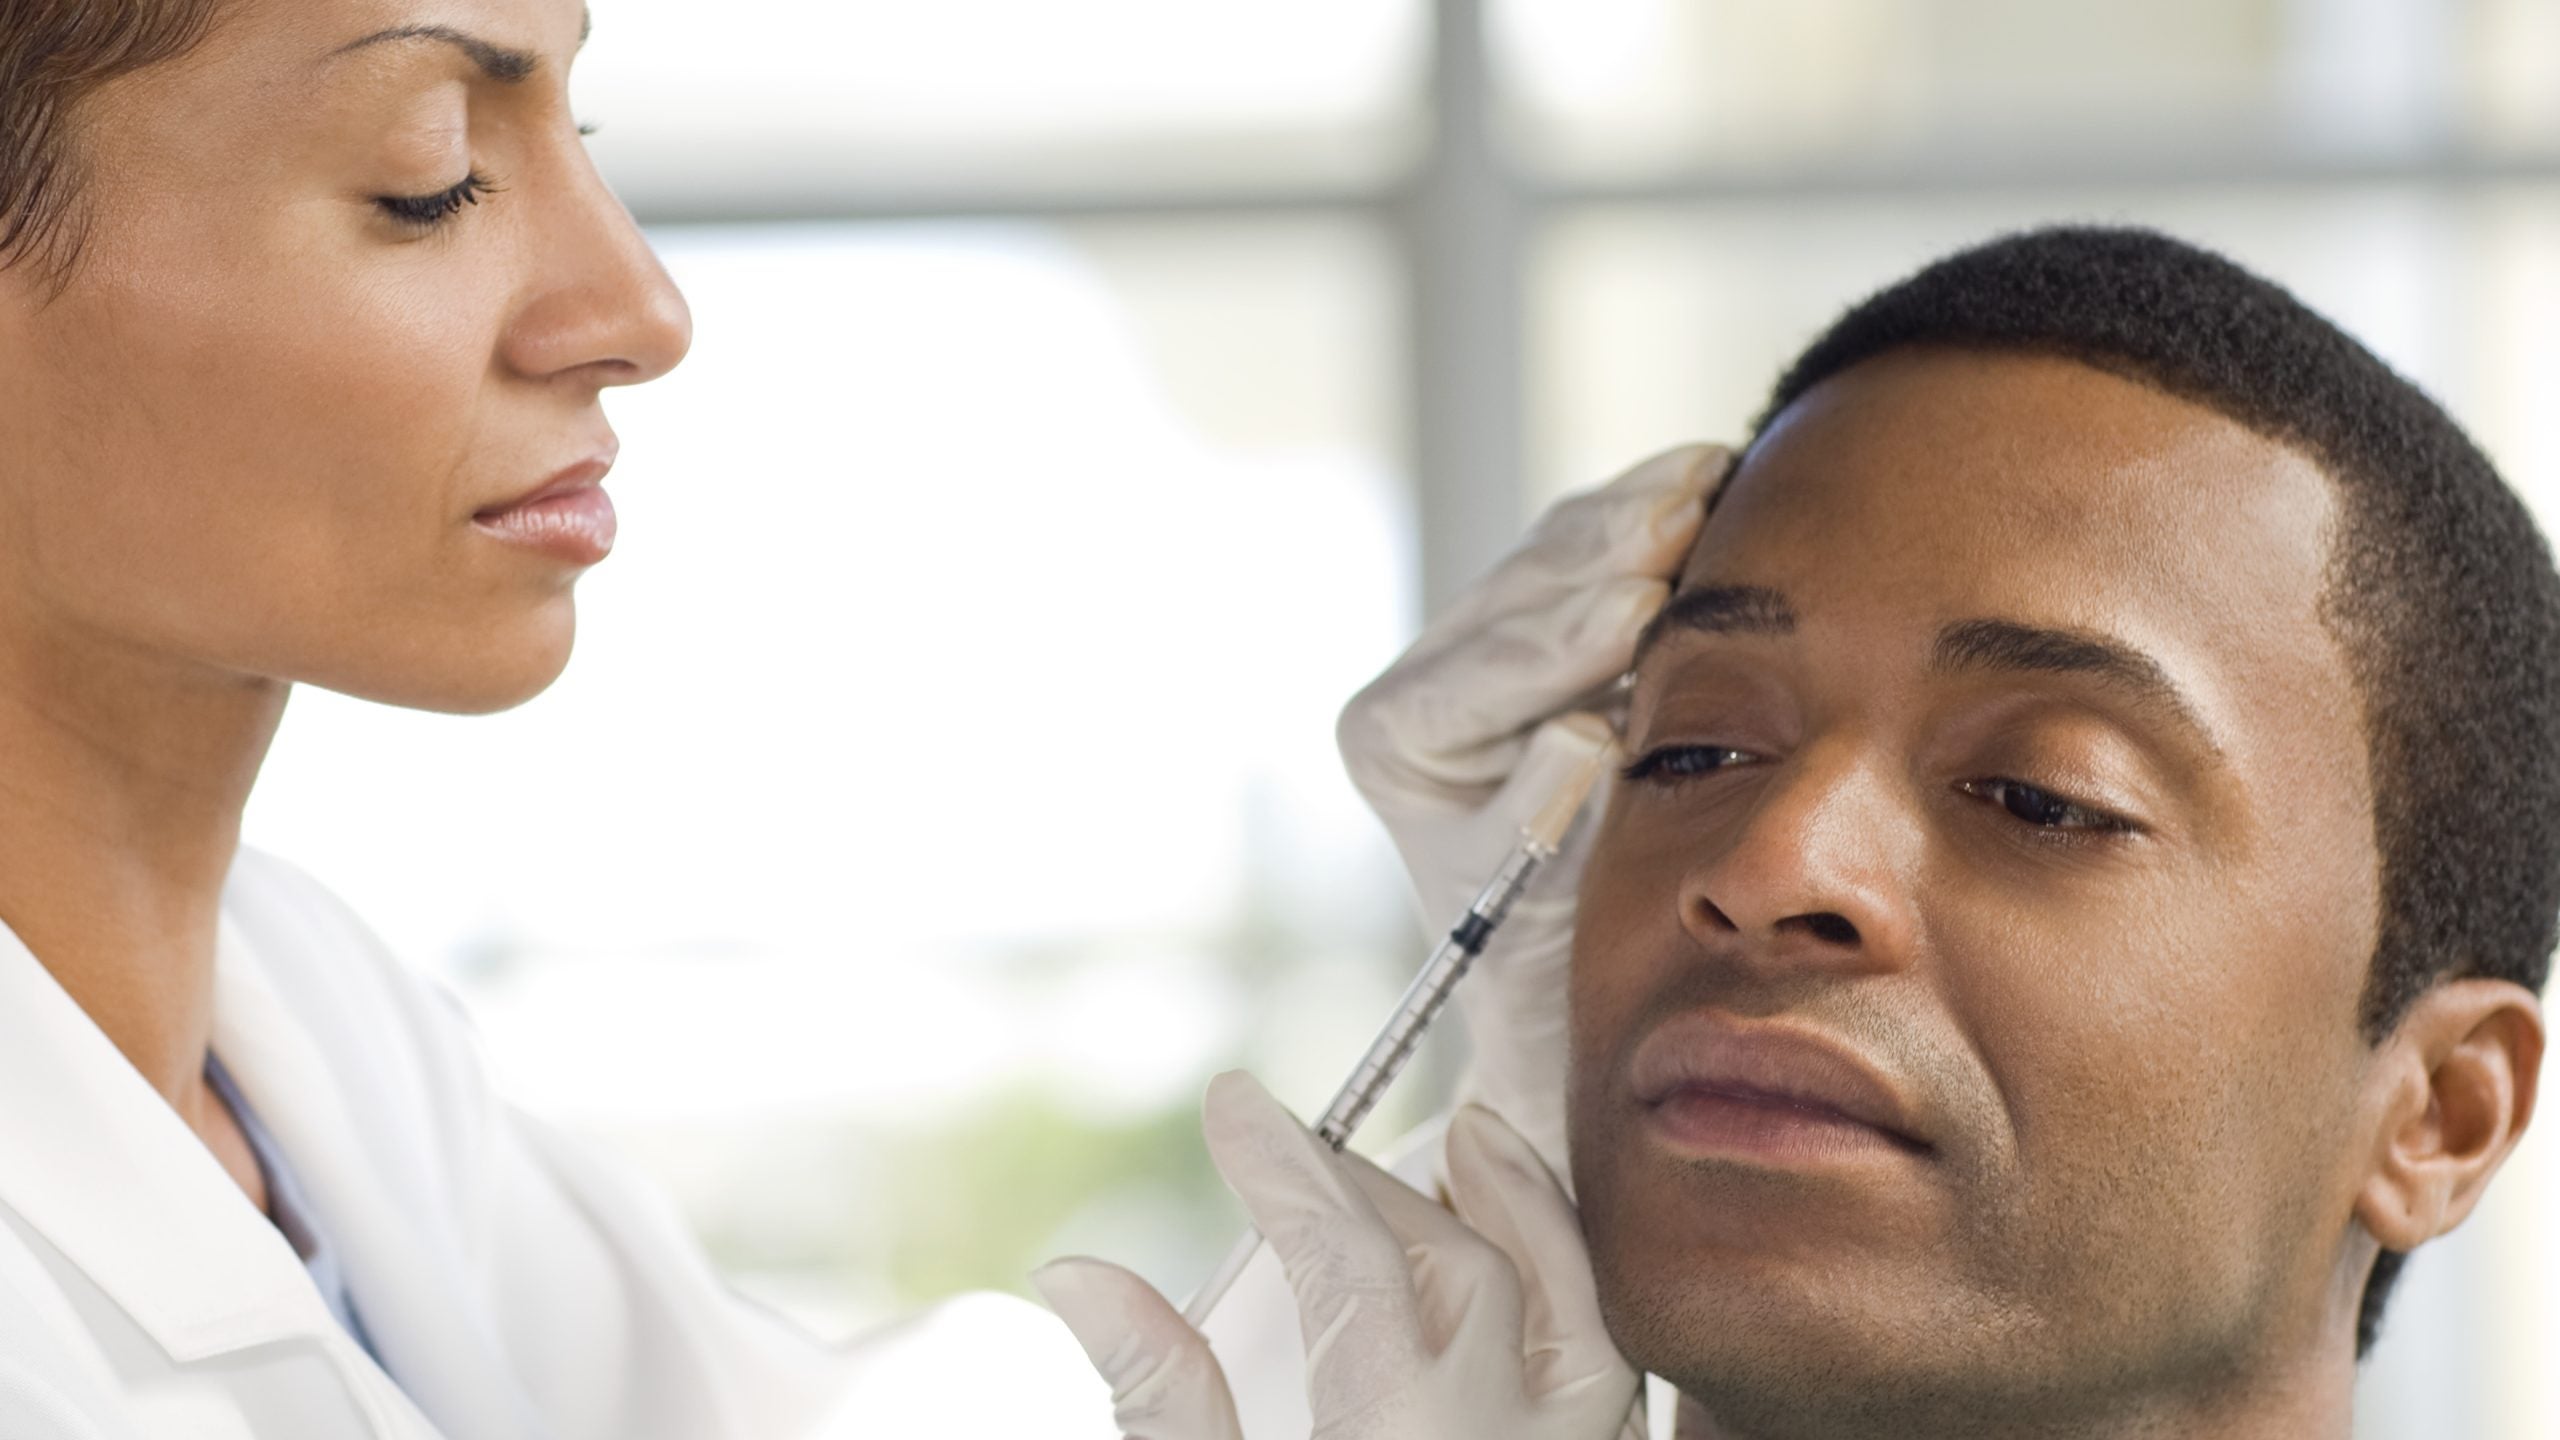 Why I Refuse To Get Work Done As a Black Man In The Age Of Botox and Fillers